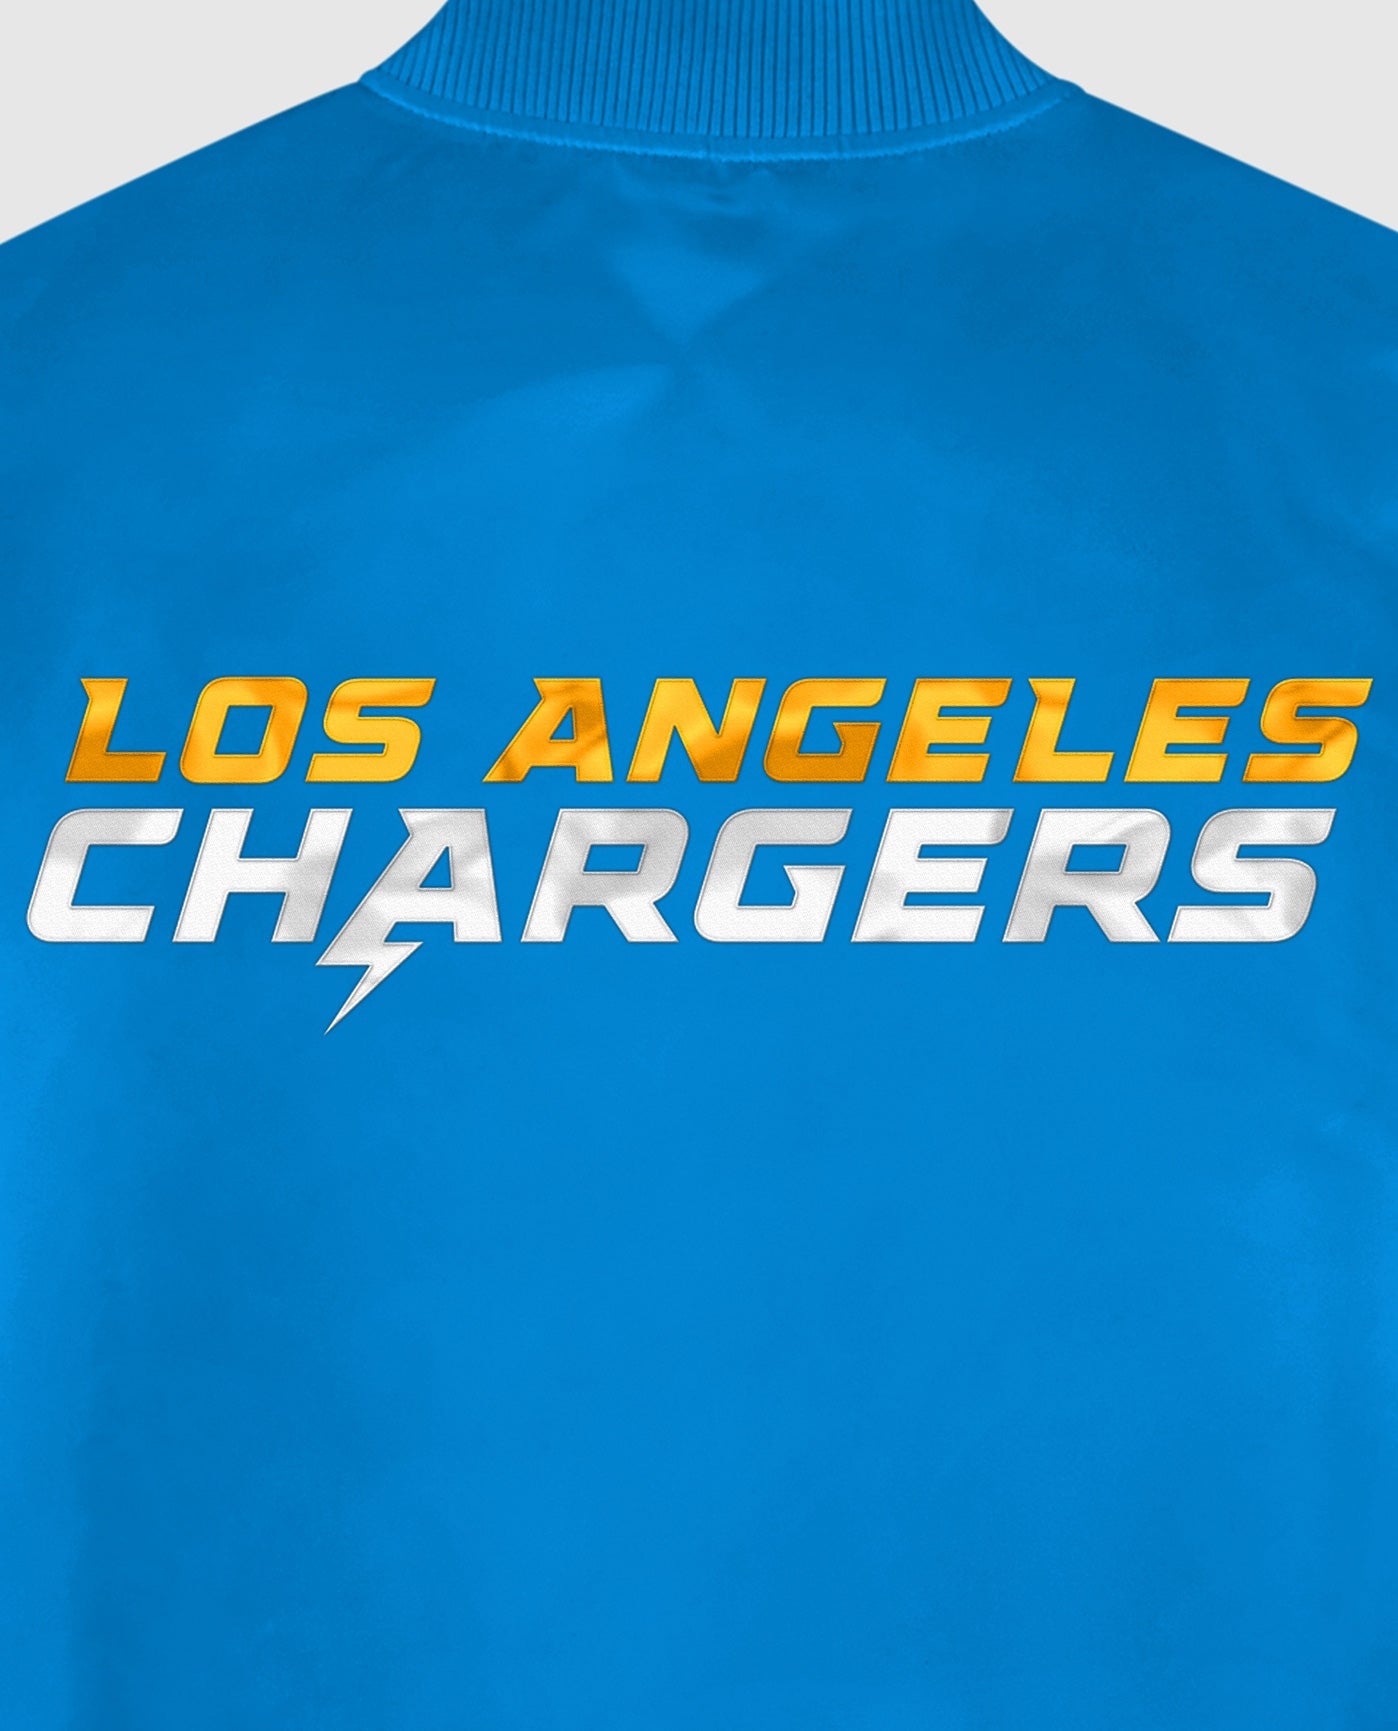 Los Angeles Chargers Team Name Twill Applique | Chargers Light Blue